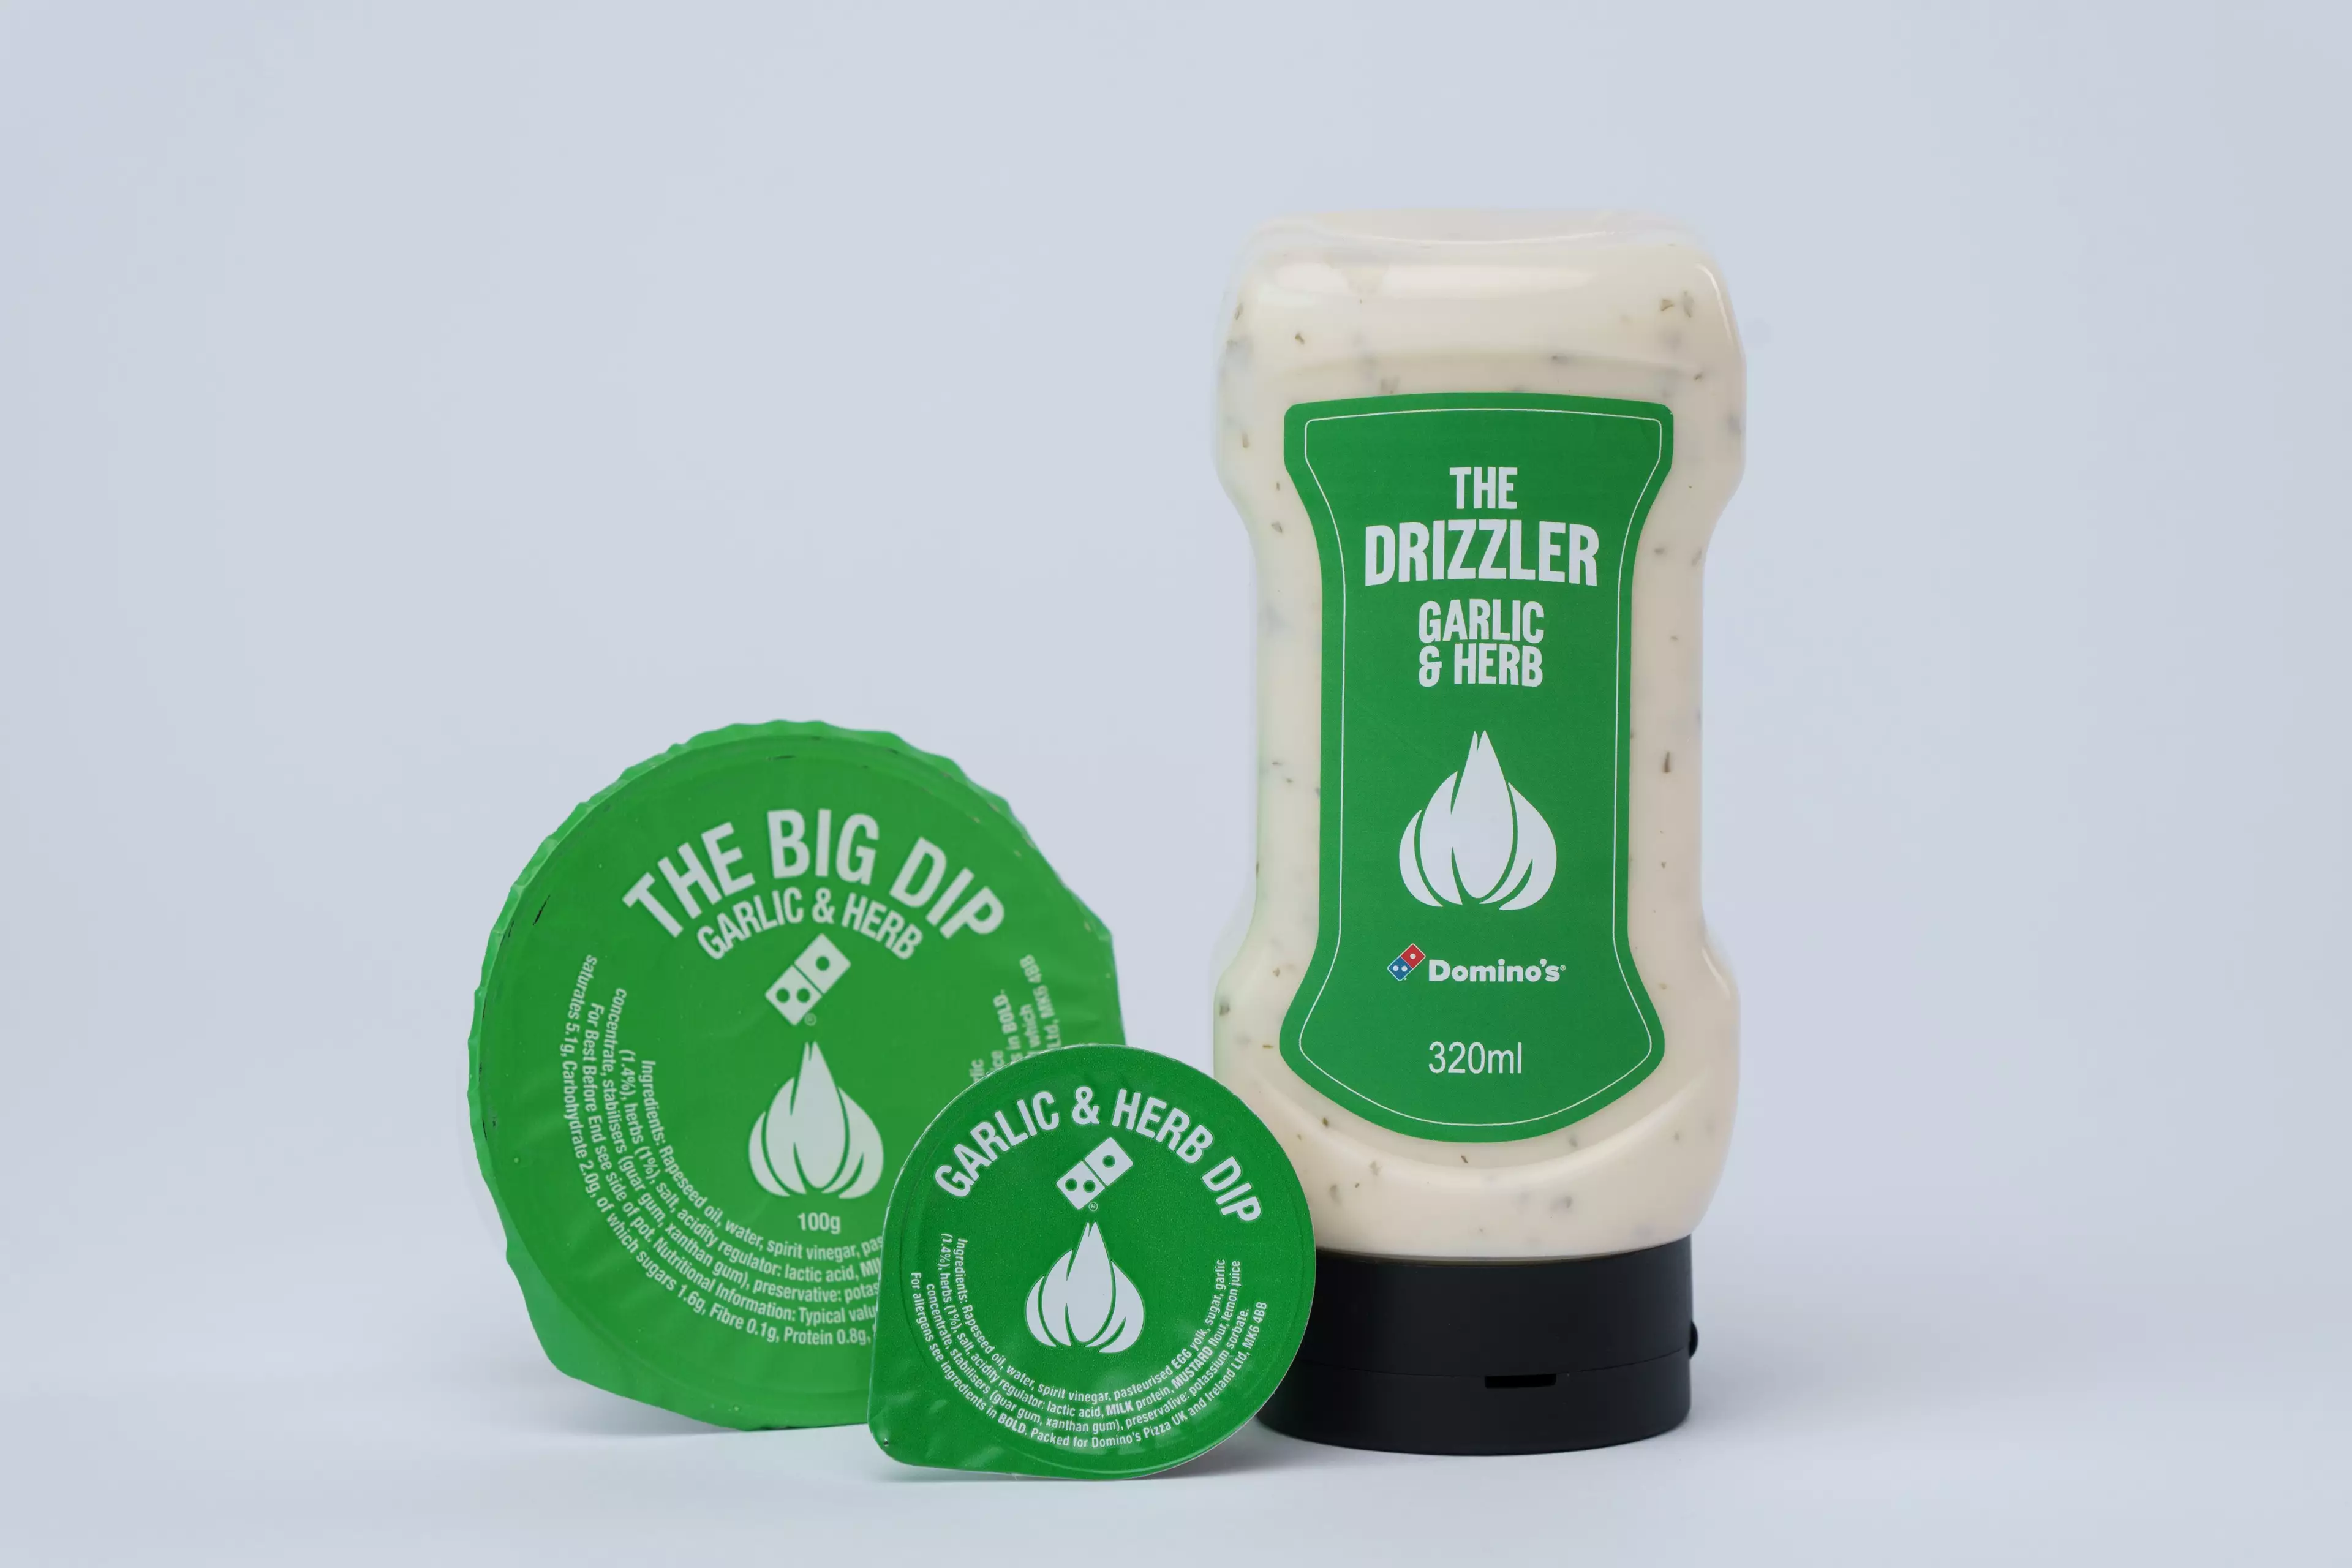 The drizzle dip is a must for any garlic and herb fan (